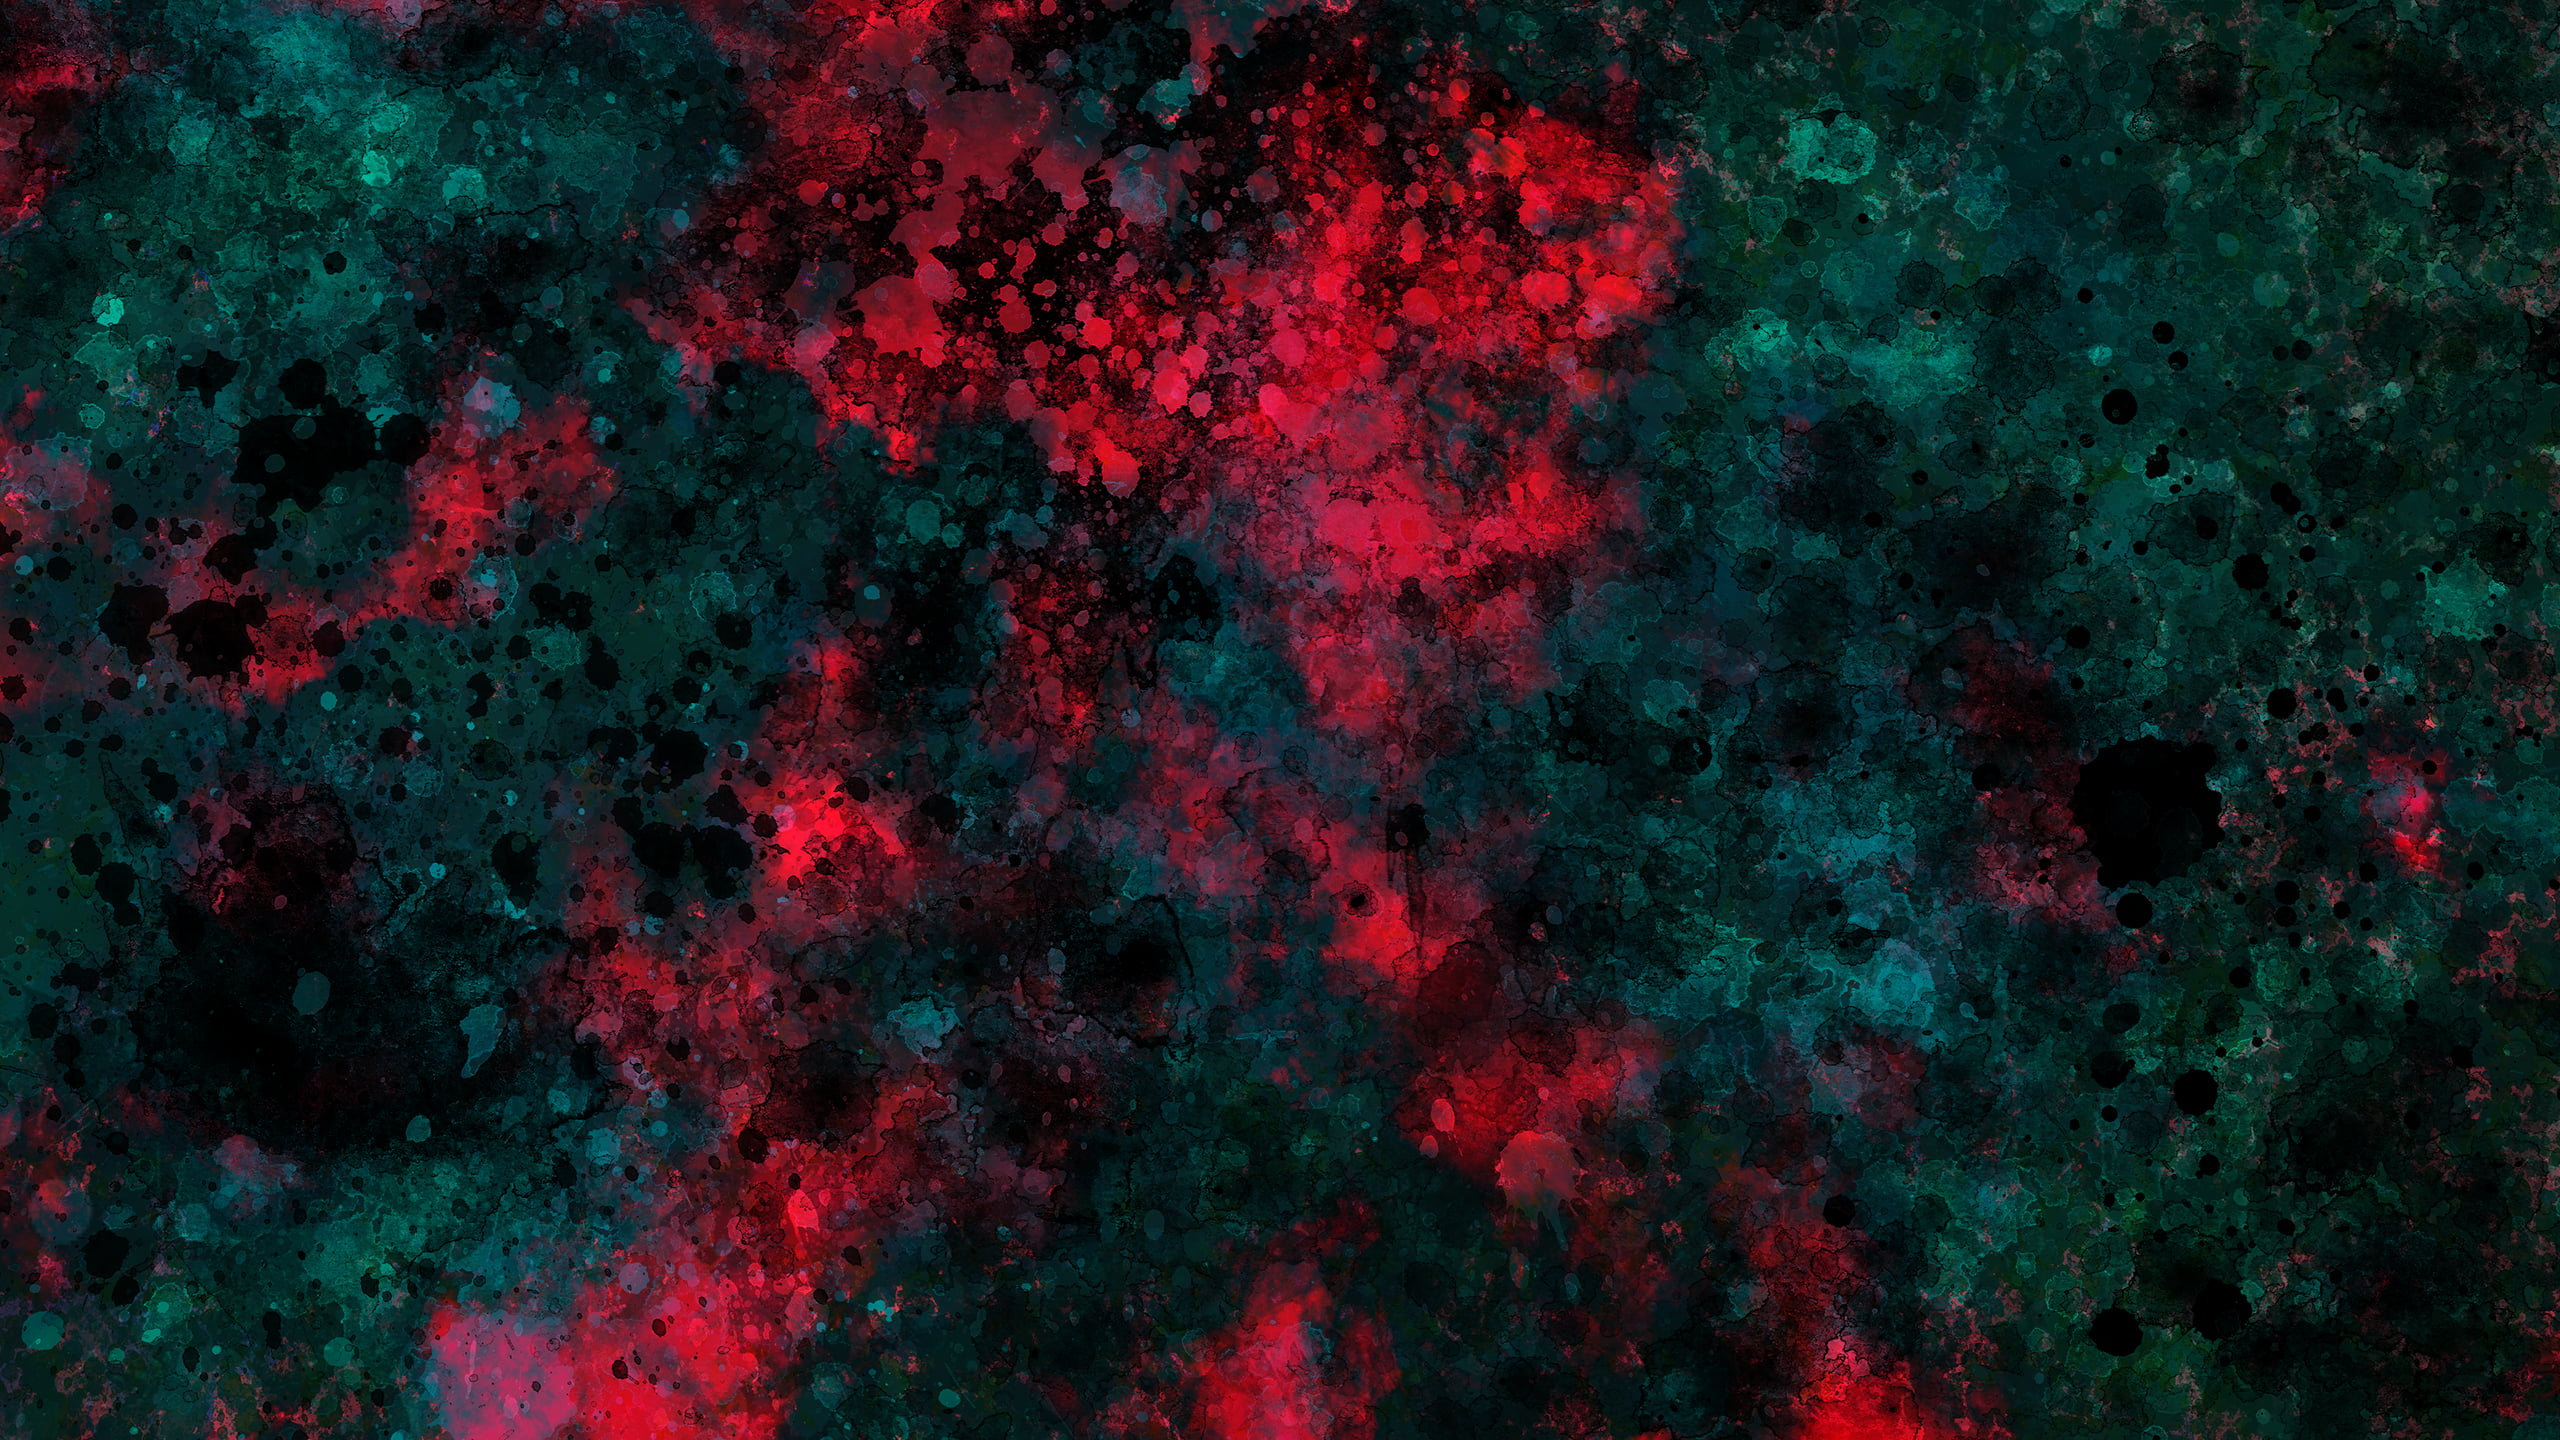 red, black, and green abstract digital wallpaper